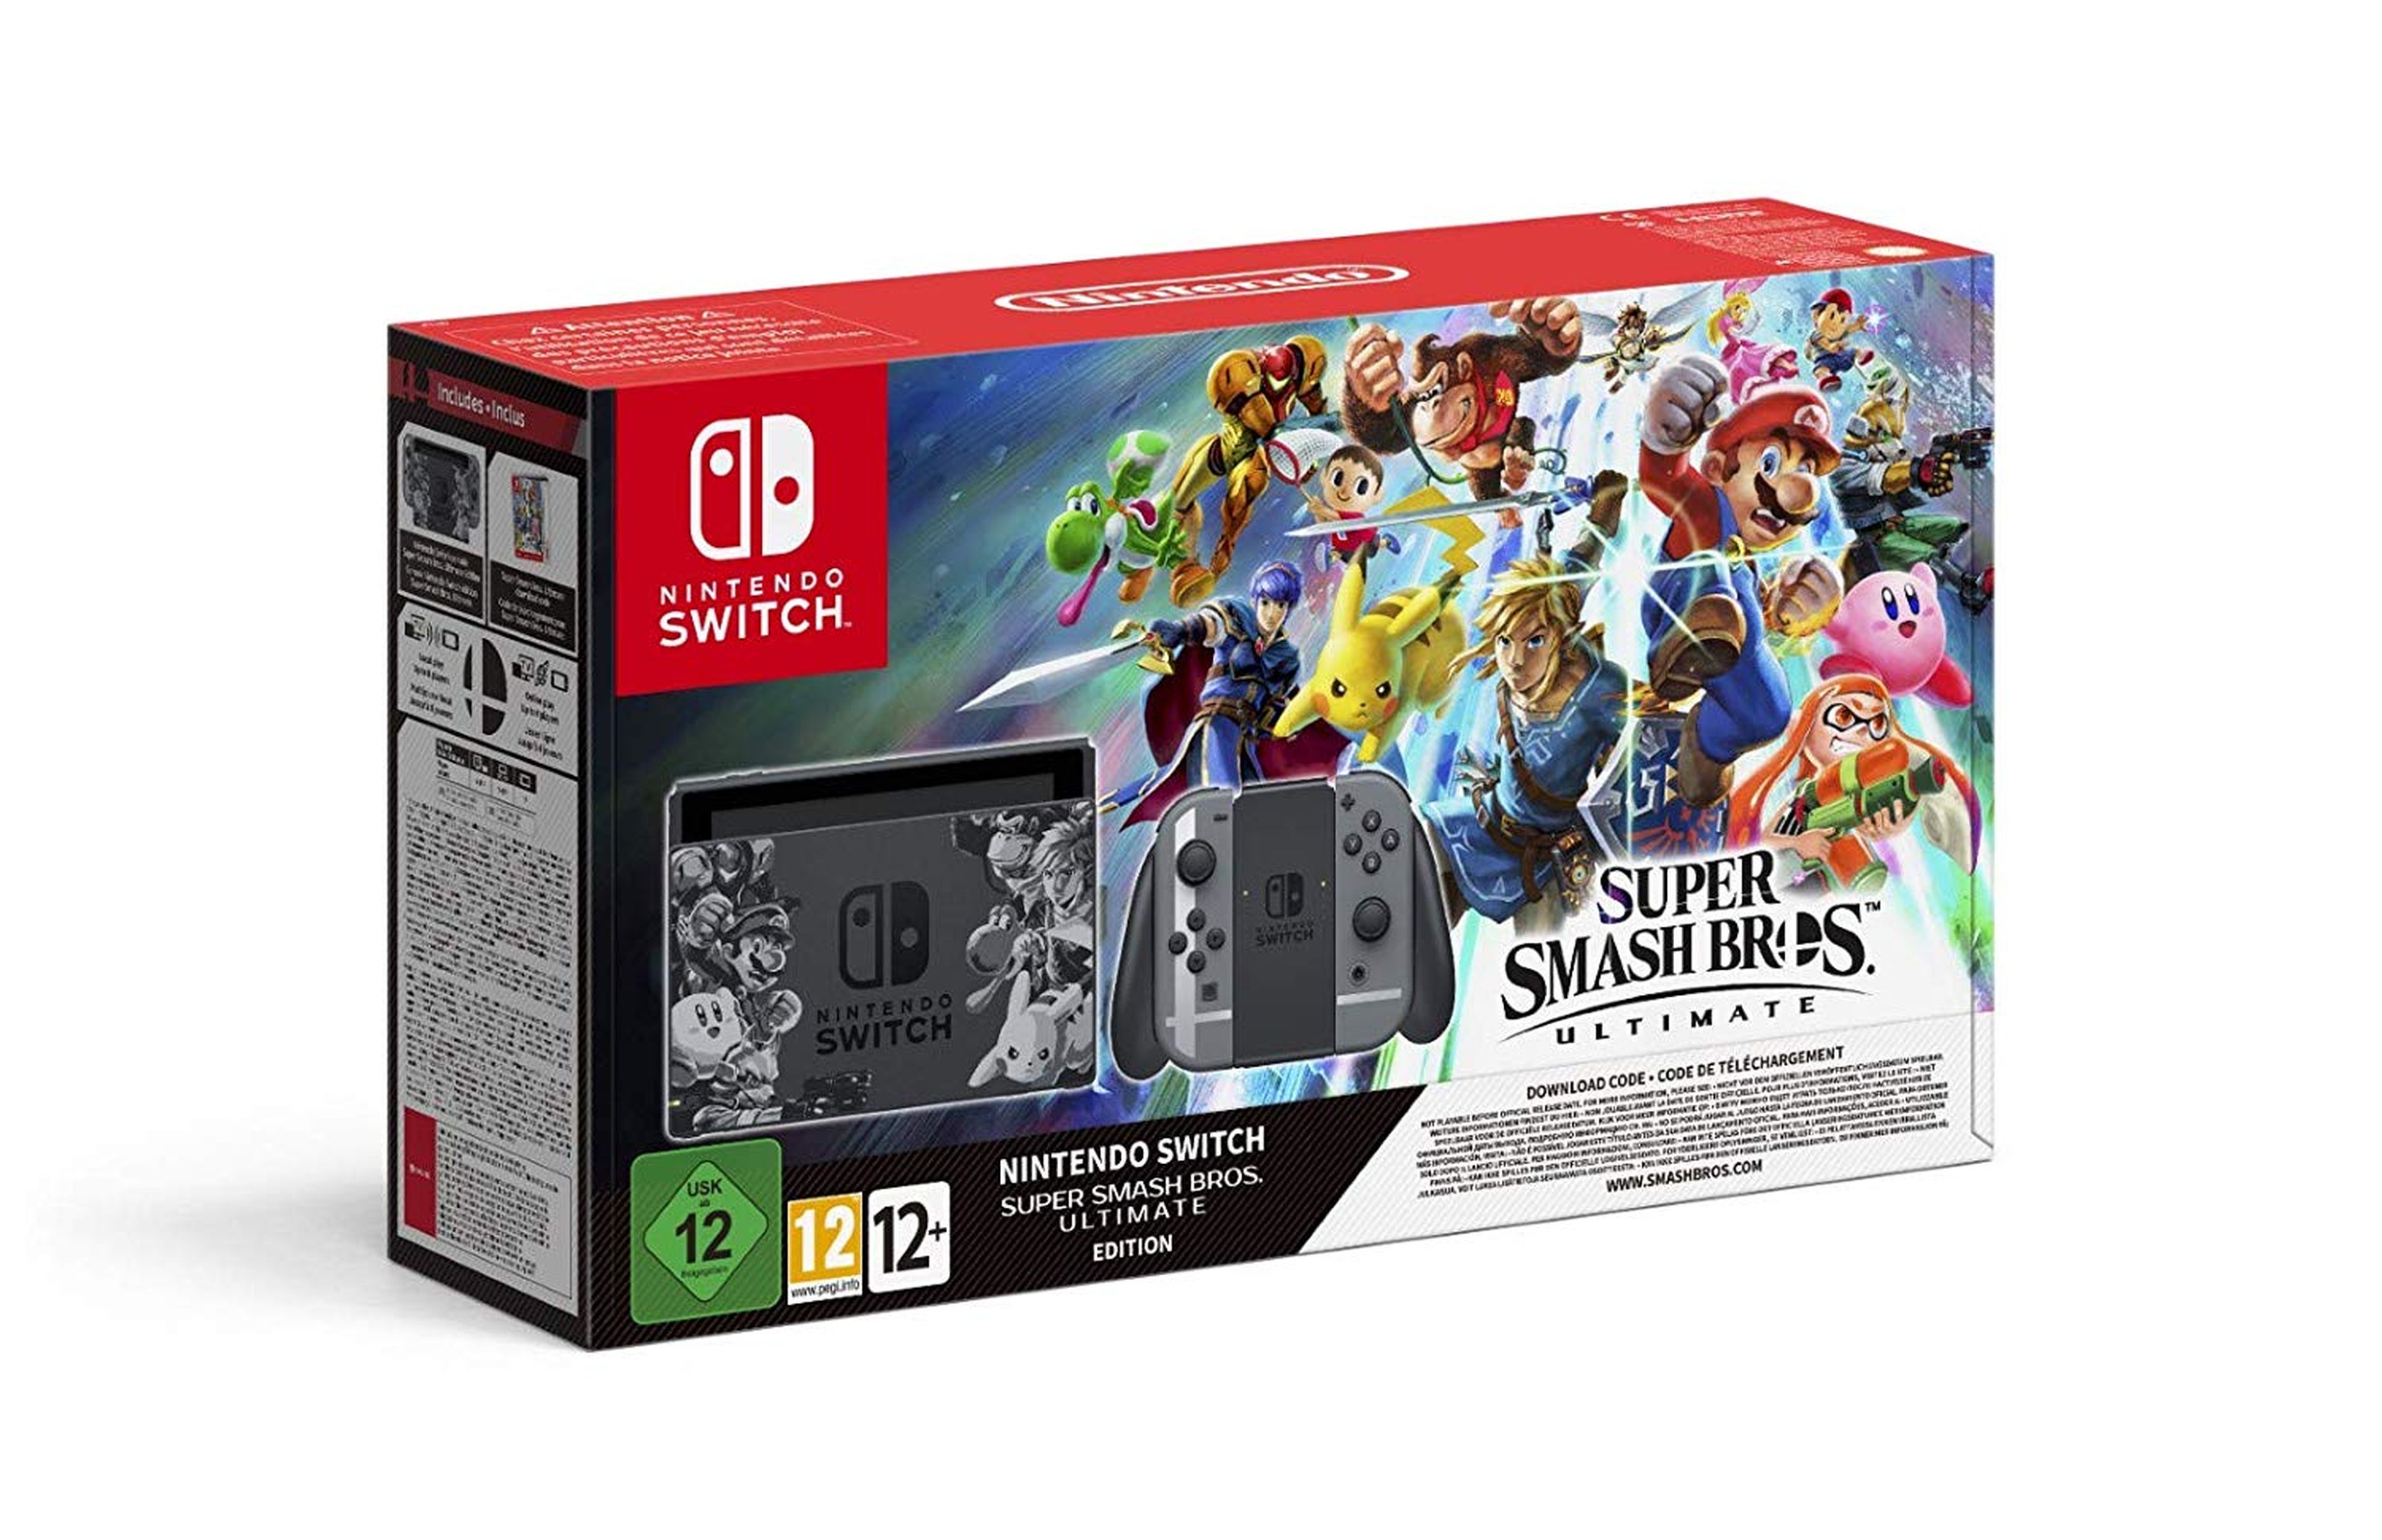 Pack Smash Bros con Switch